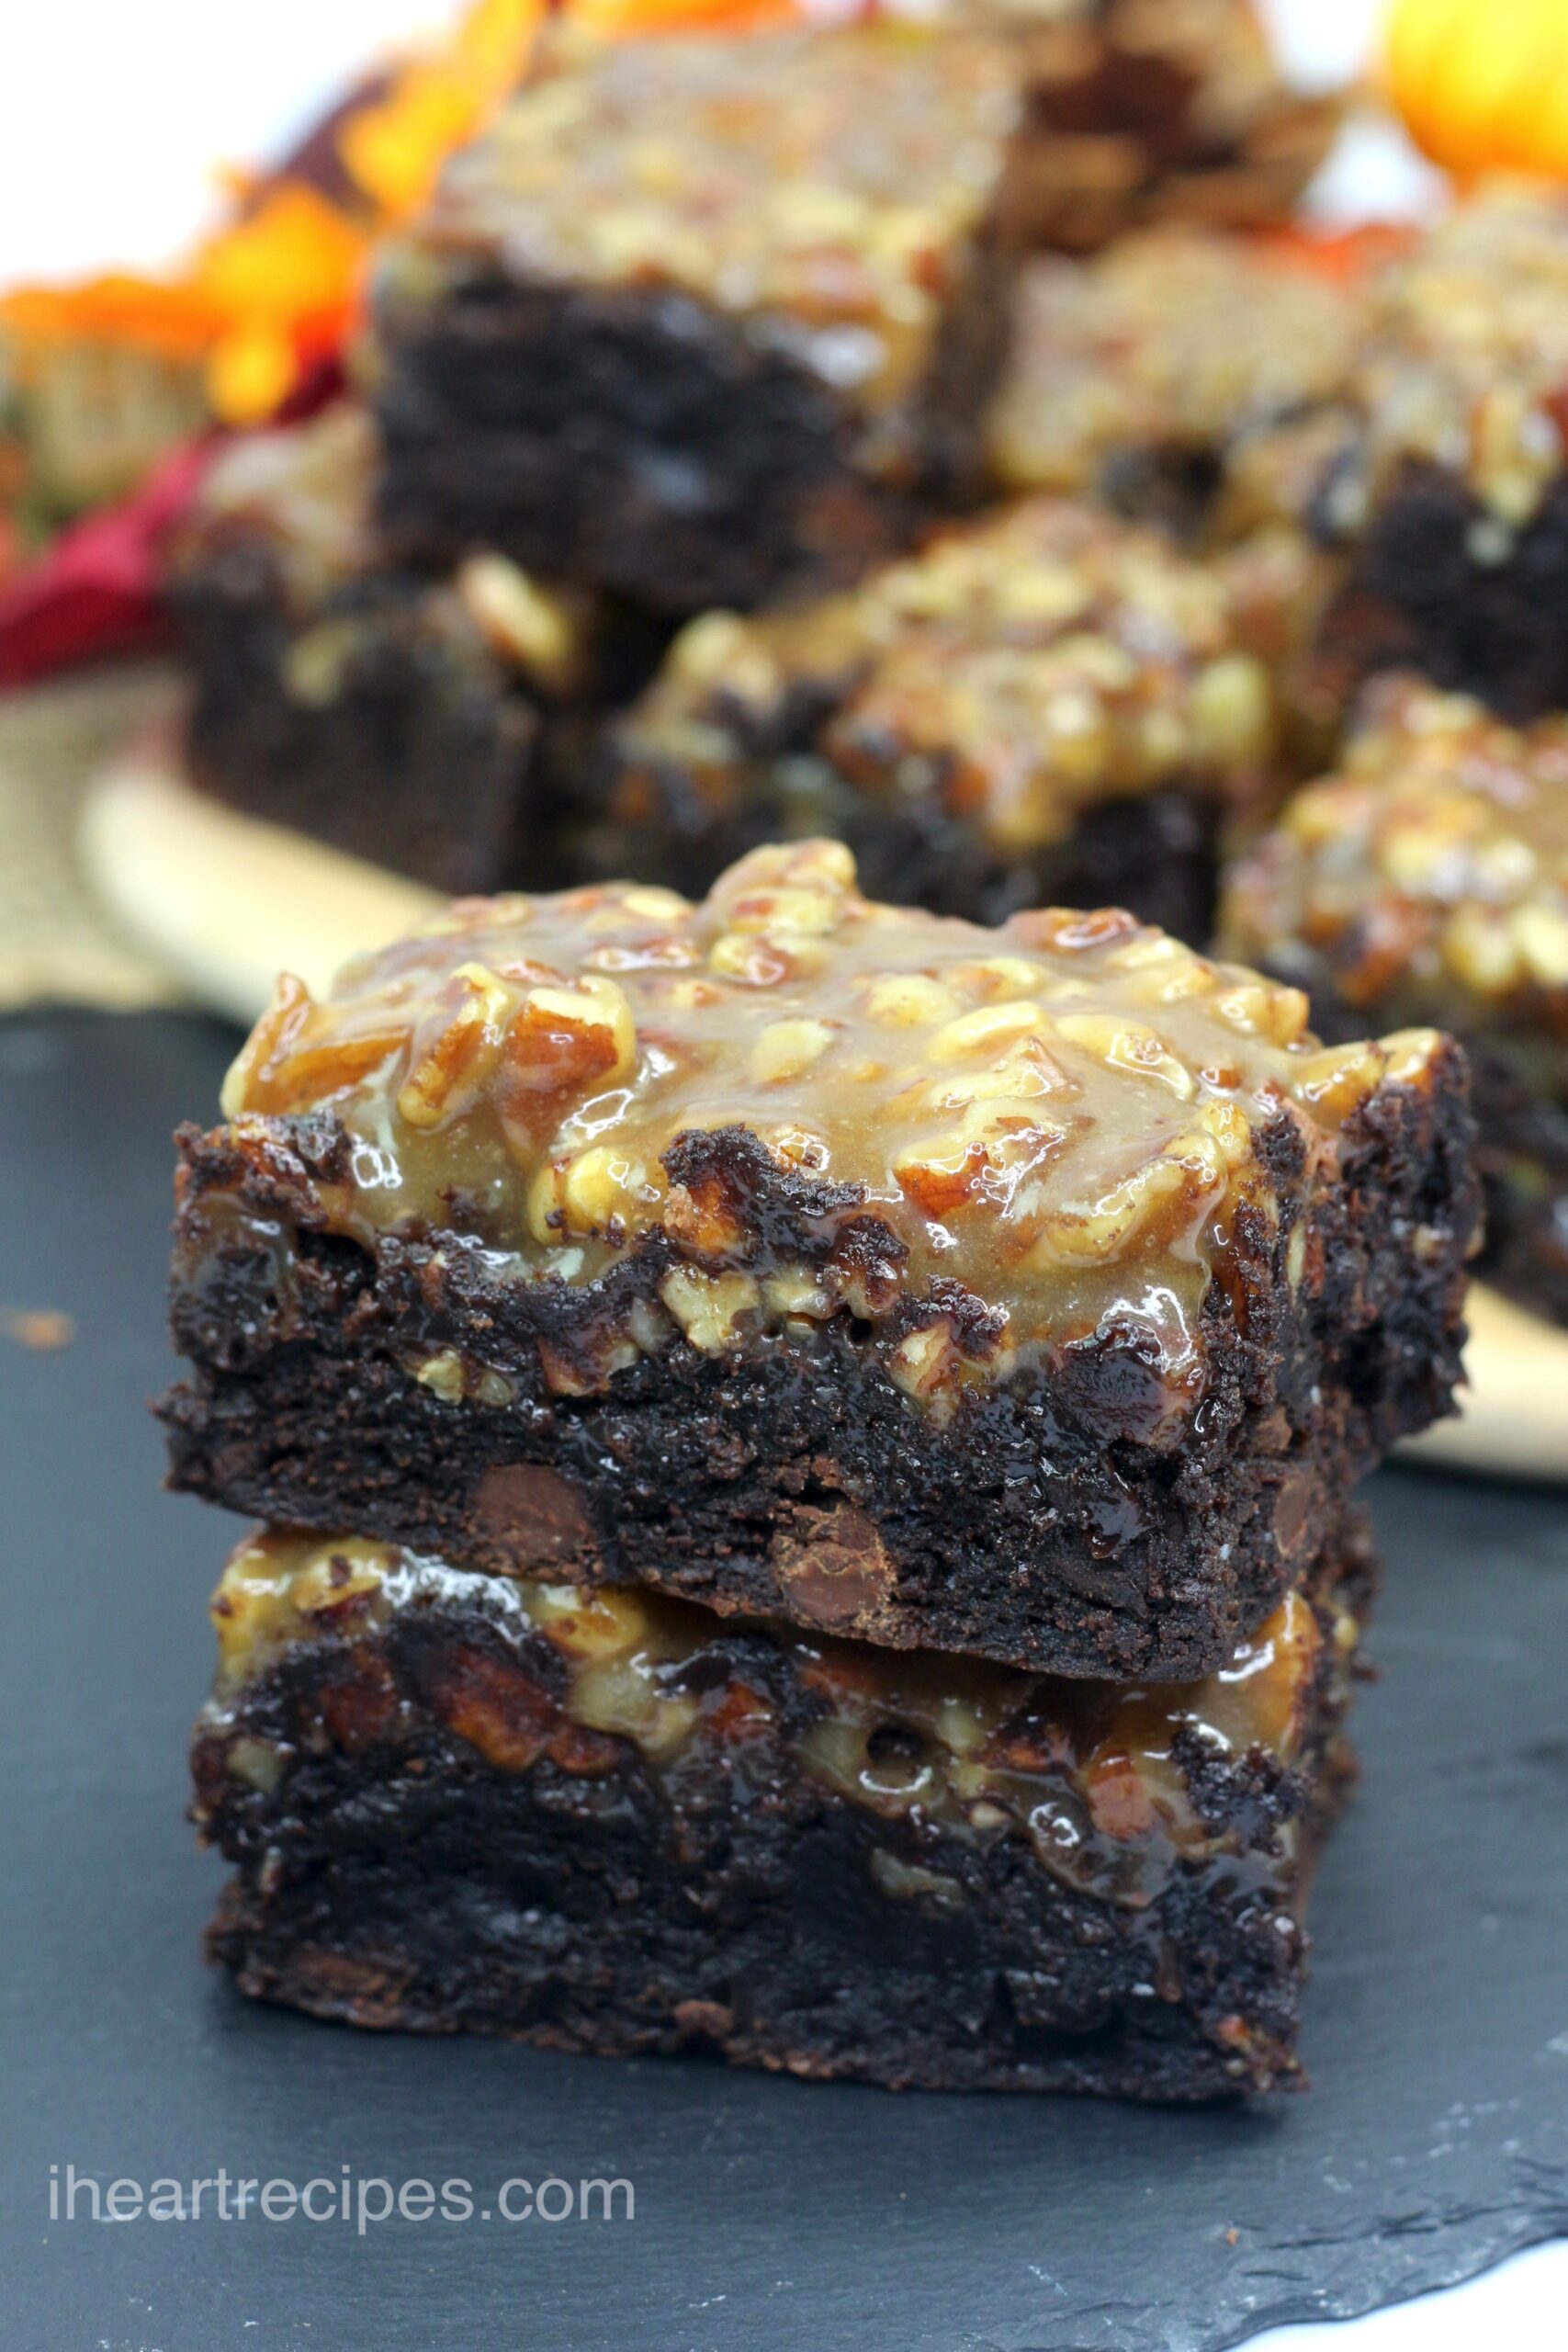 Two fudgy pecan pie brownies stacked on top of each other. These sweet, moist brownies have chocolate chips in each bite, along with a gooey pecan pie filling.